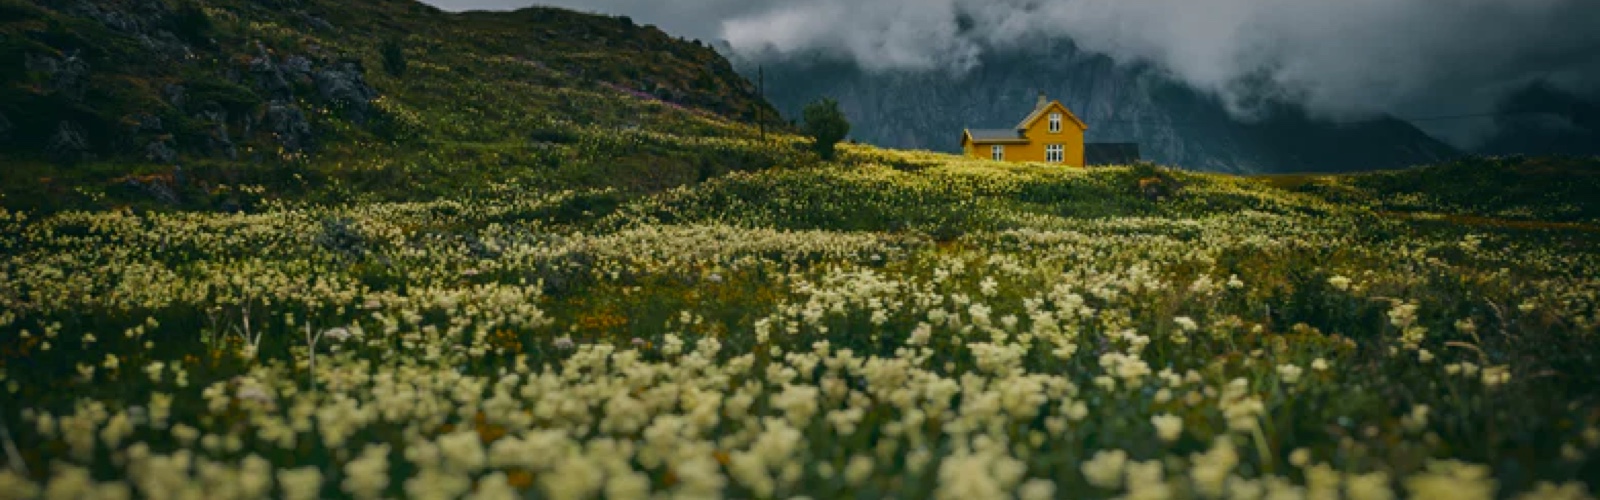 A yellow house in the distance, surrounded by rocky fields with yellow flowers.